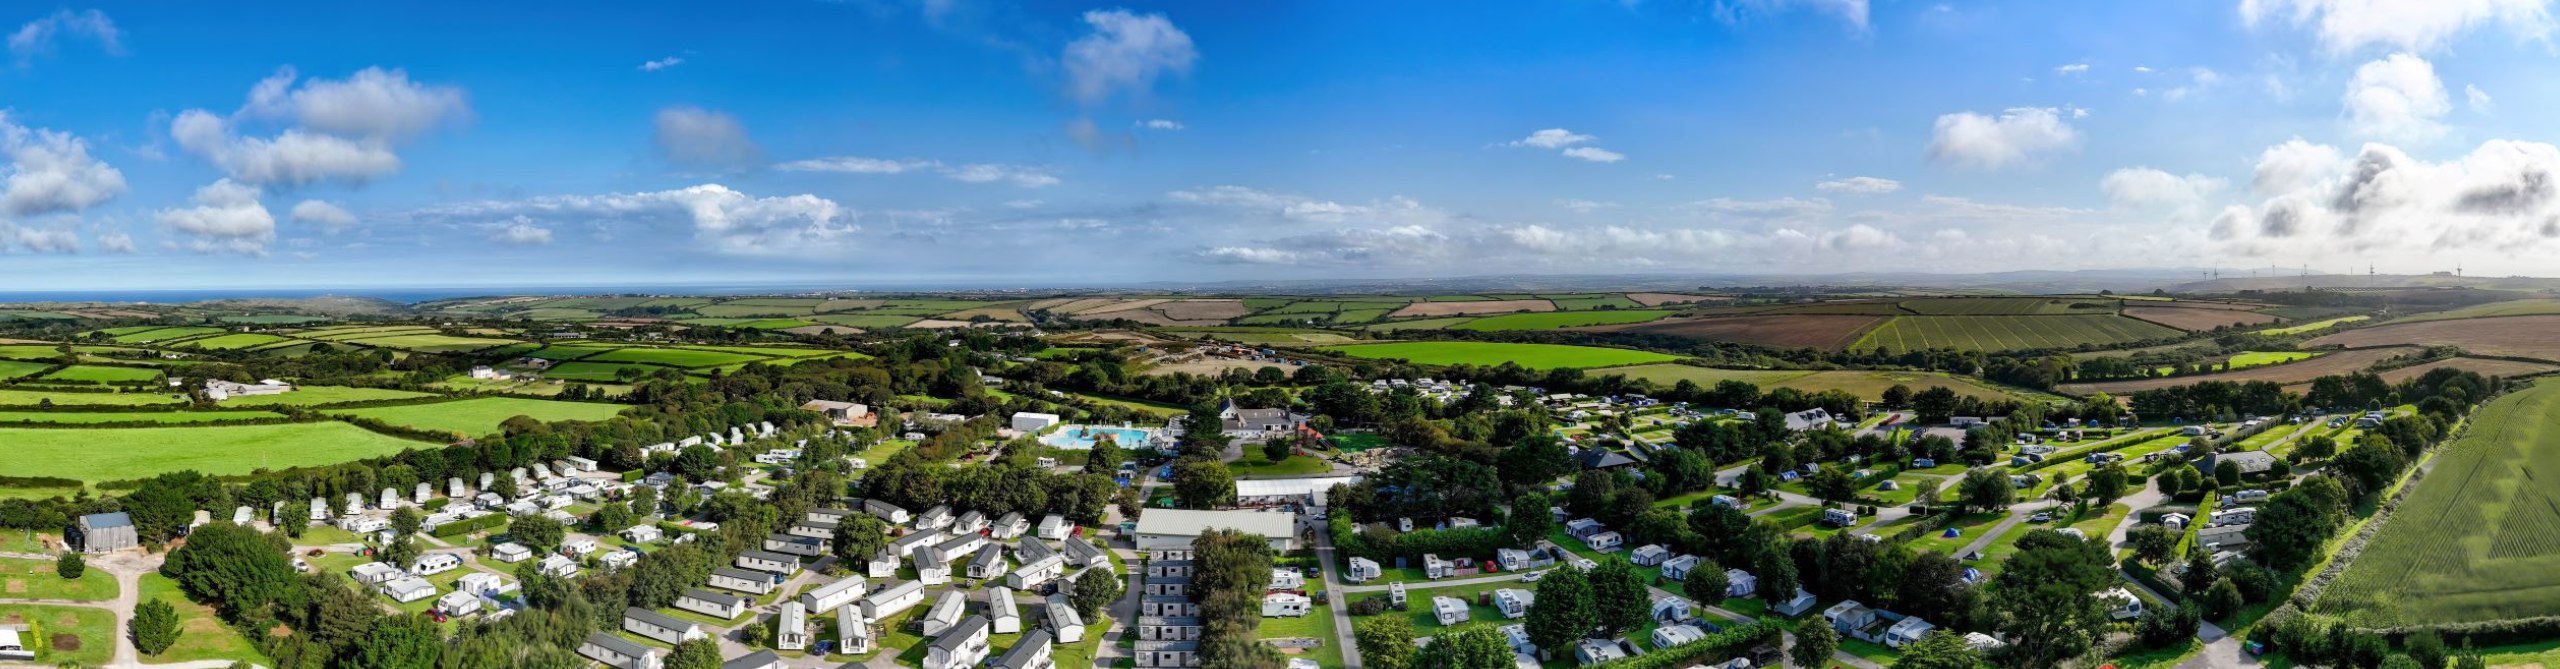 Panoramic aerial view of a lush rural Cornwall landscape featuring a large campground with numerous holiday homes, surrounded by expansive green fields and a clear blue sky.